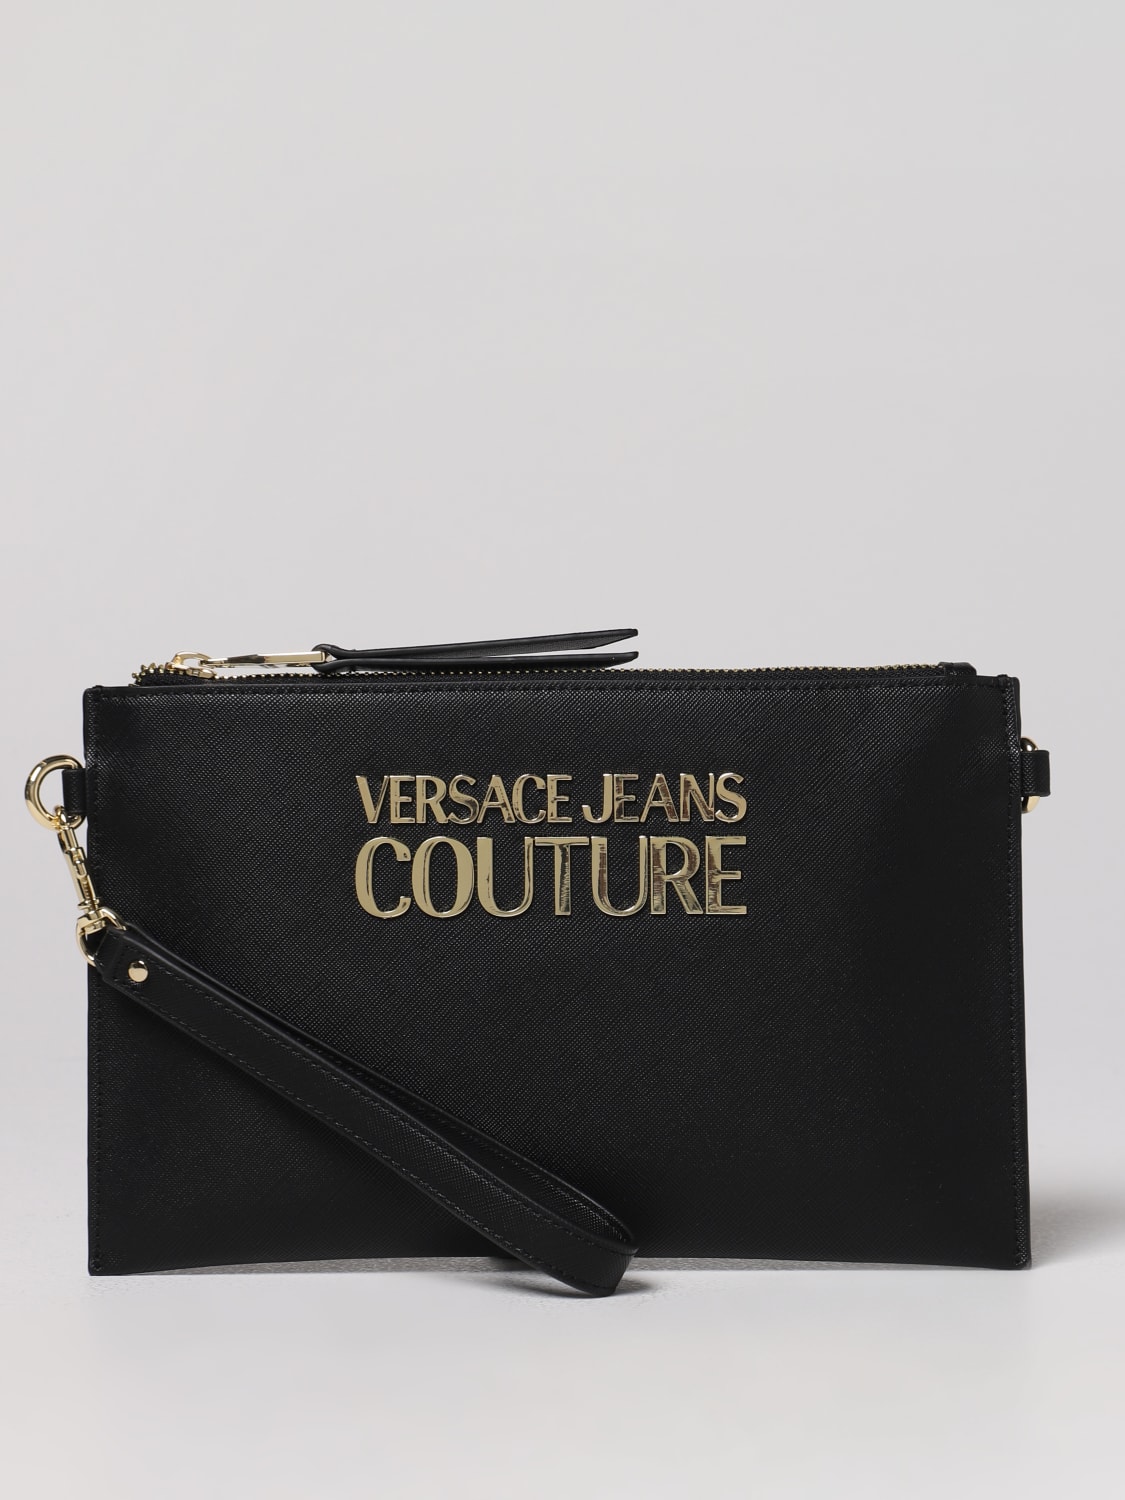 VERSACE JEANS COUTURE クラッチバッグ ブラック グレー